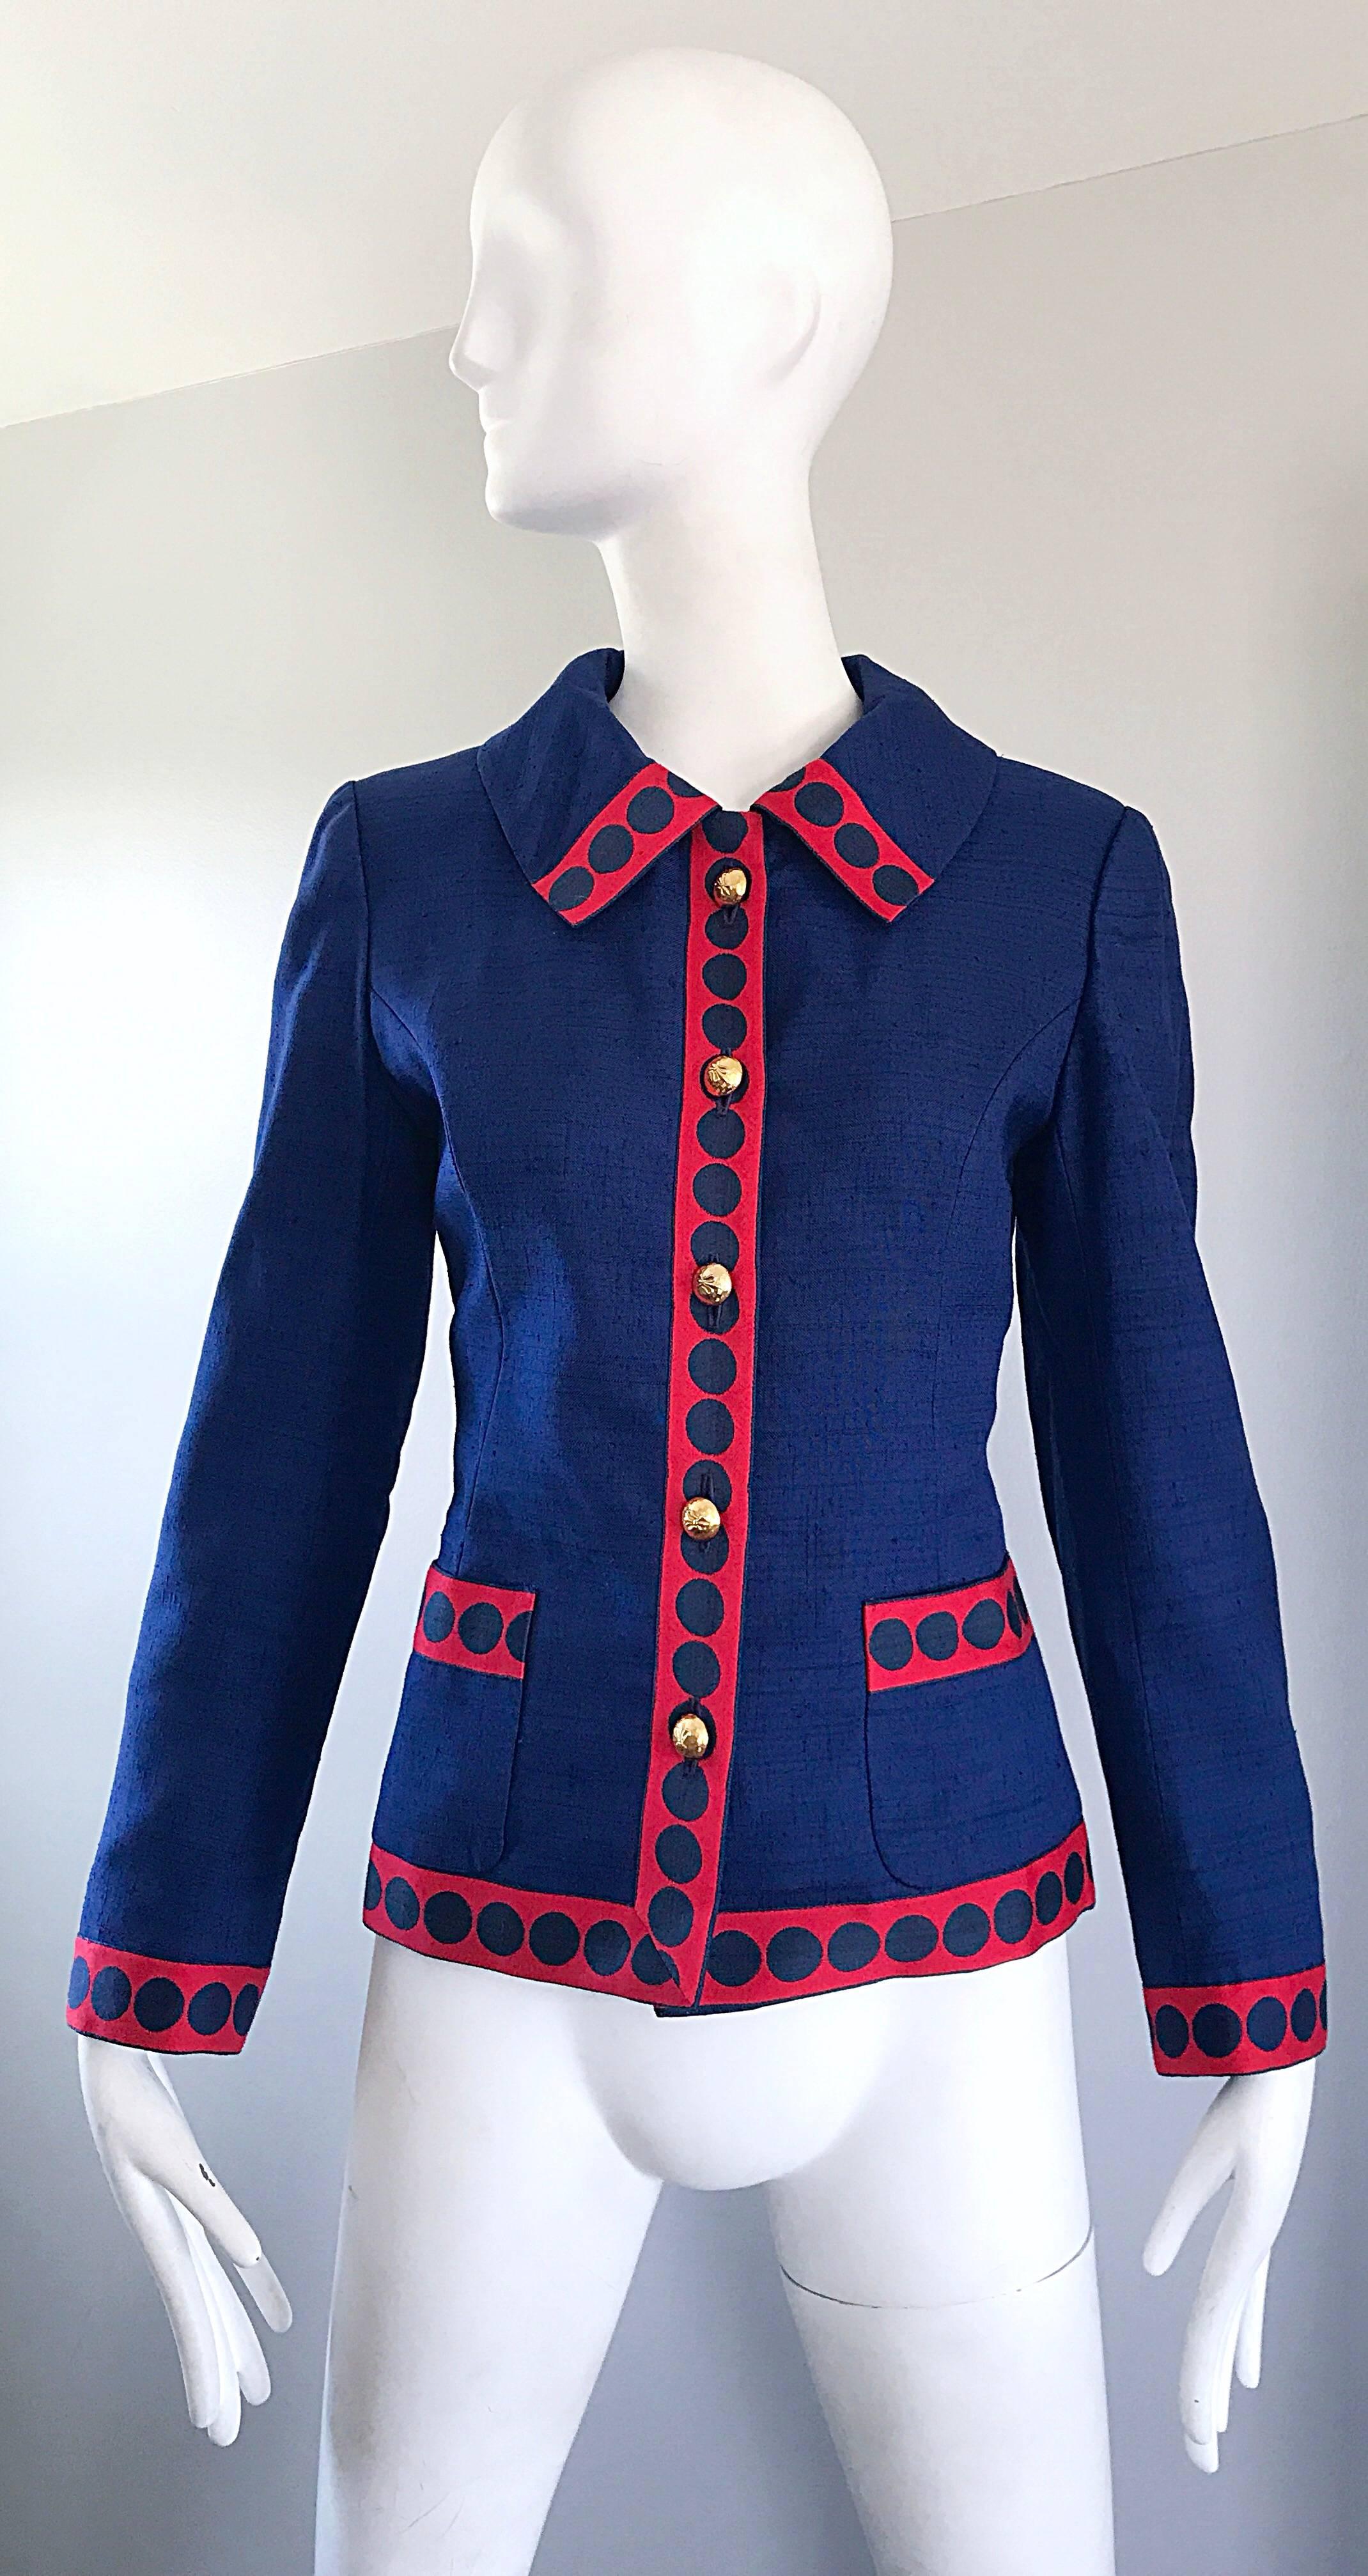 Chic 1960s GEOFFREY BEENE navy blue and red raw silk shantung nautical blazer jacket! Features a Jackie O collar, and gold buttons up the bodice. Vibrant navy blue is offset with red polka dots throughout. Pocket at each side of the waist. Expertly